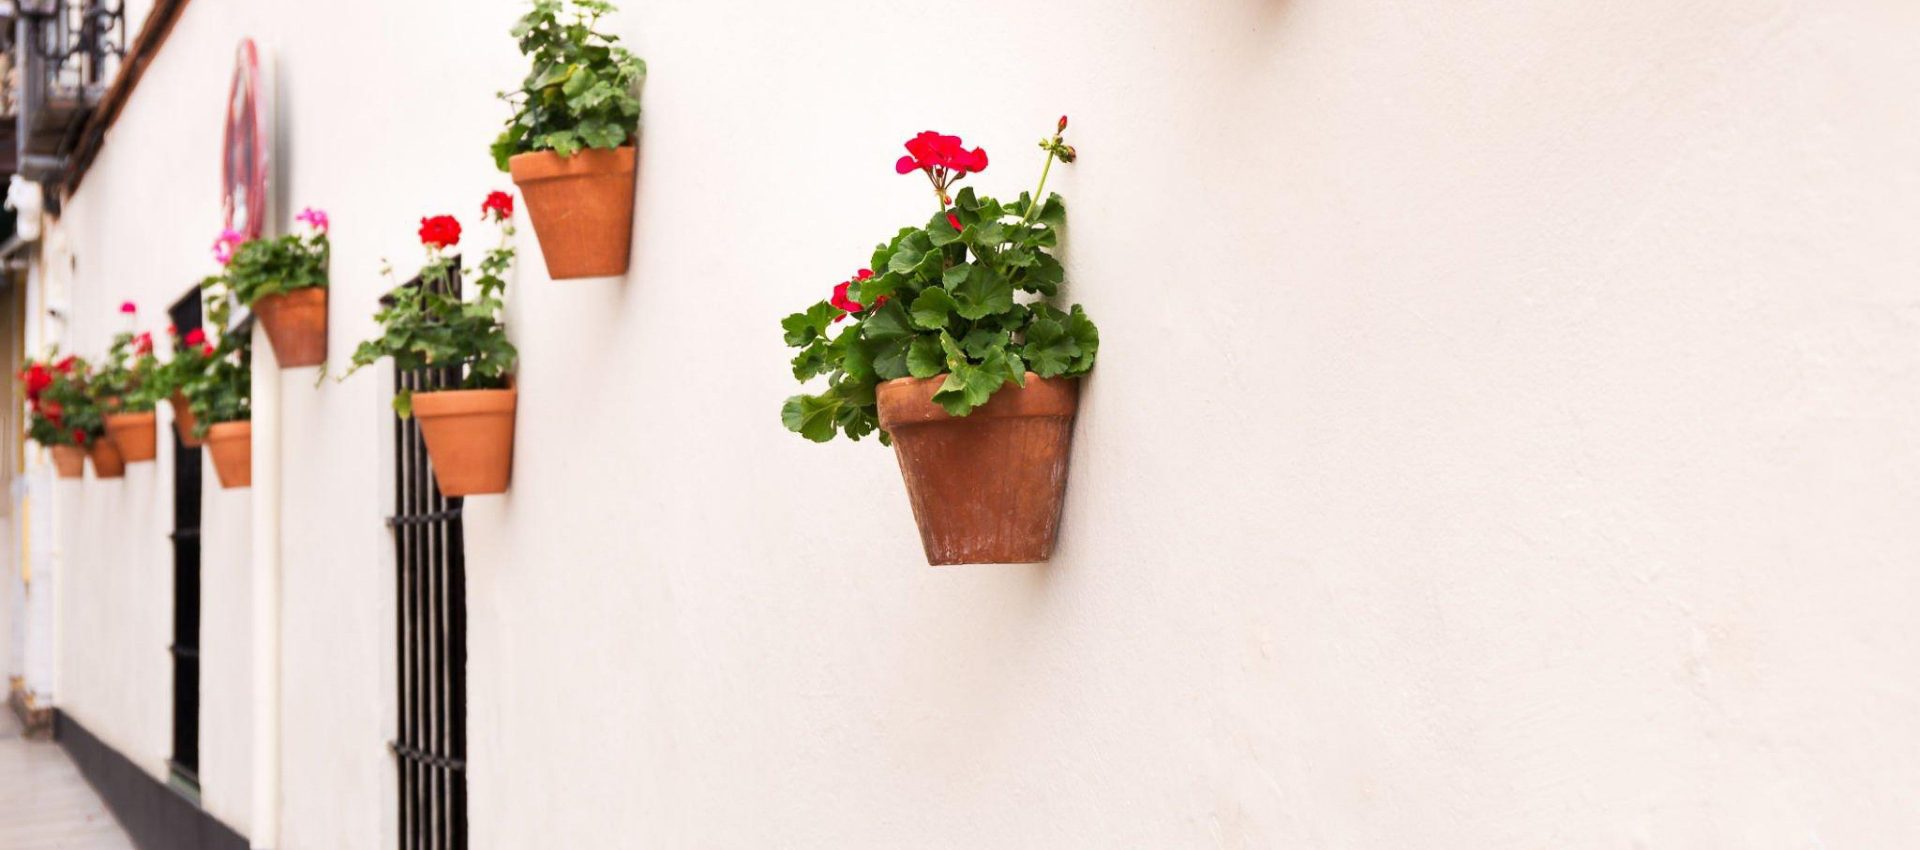 White wall decorated with colorful flowerpots typical of Andalusian cities.